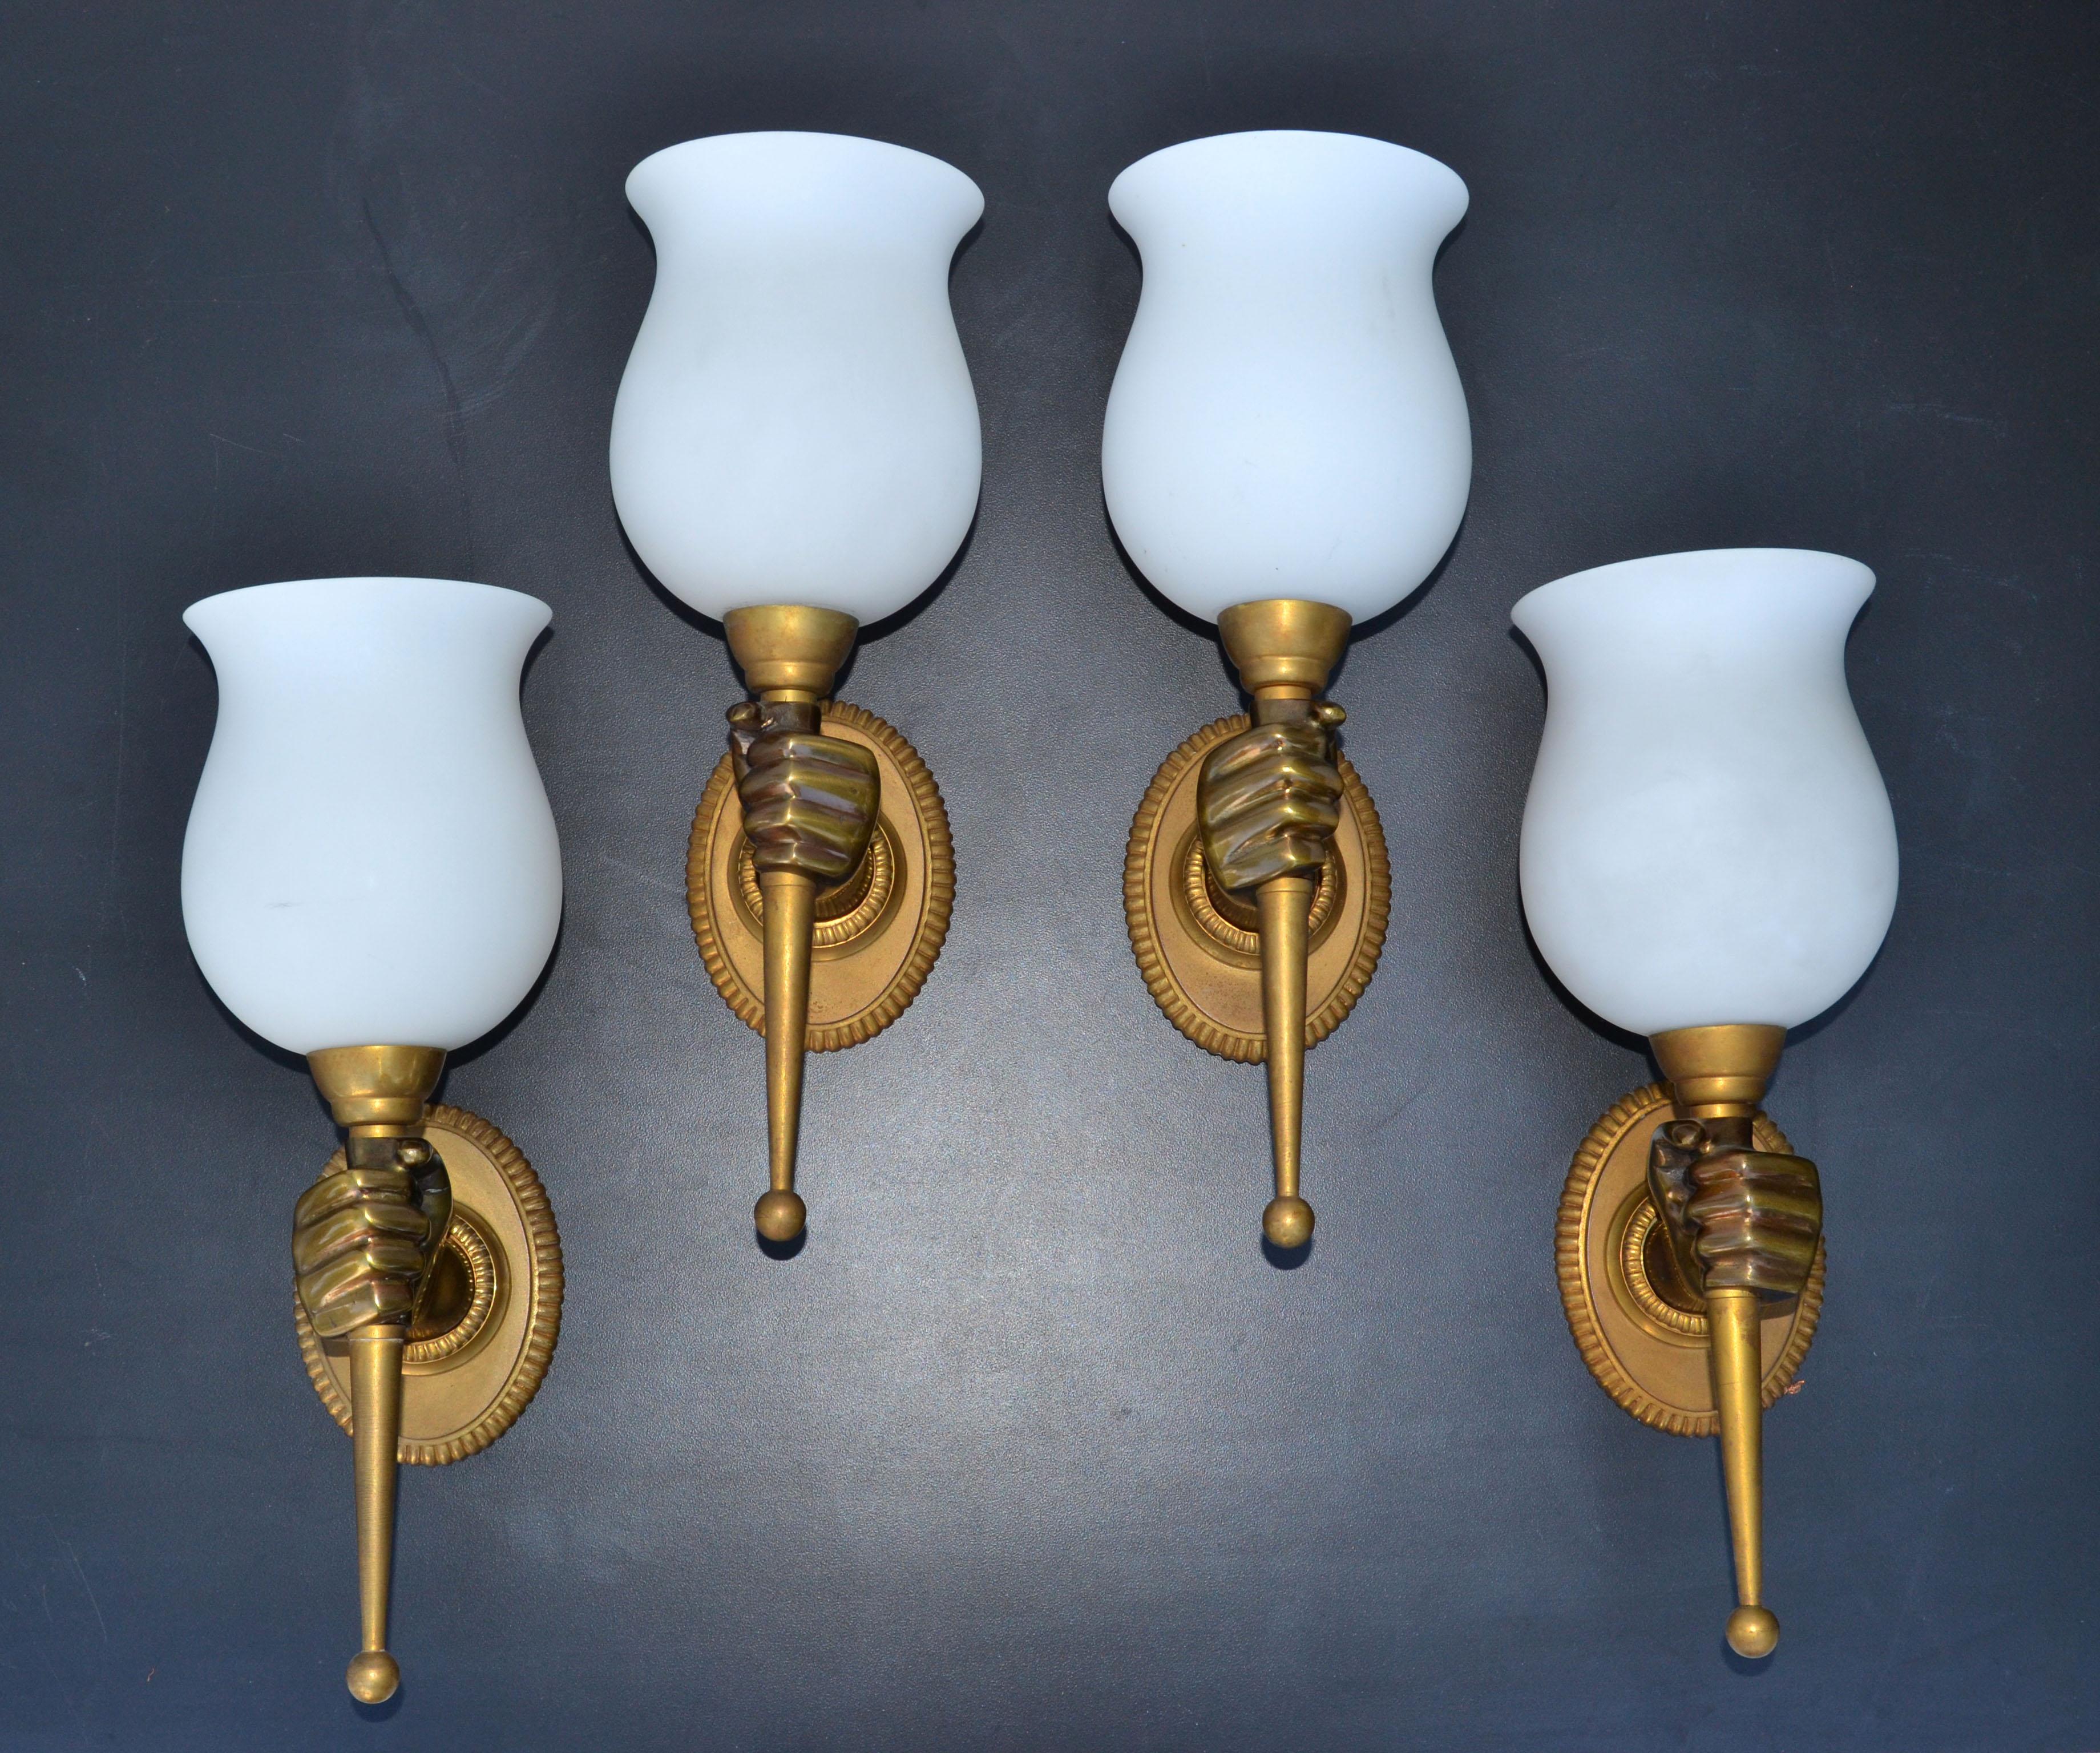 Superb pair of Maison Arlus opposite hand sconce holding a white opaline blown glass shade.
We have 2 pair available, listing is priced by pair.
Perfect working condition and each wall light takes 1 light bulb with max 60 watts. 
Back plate